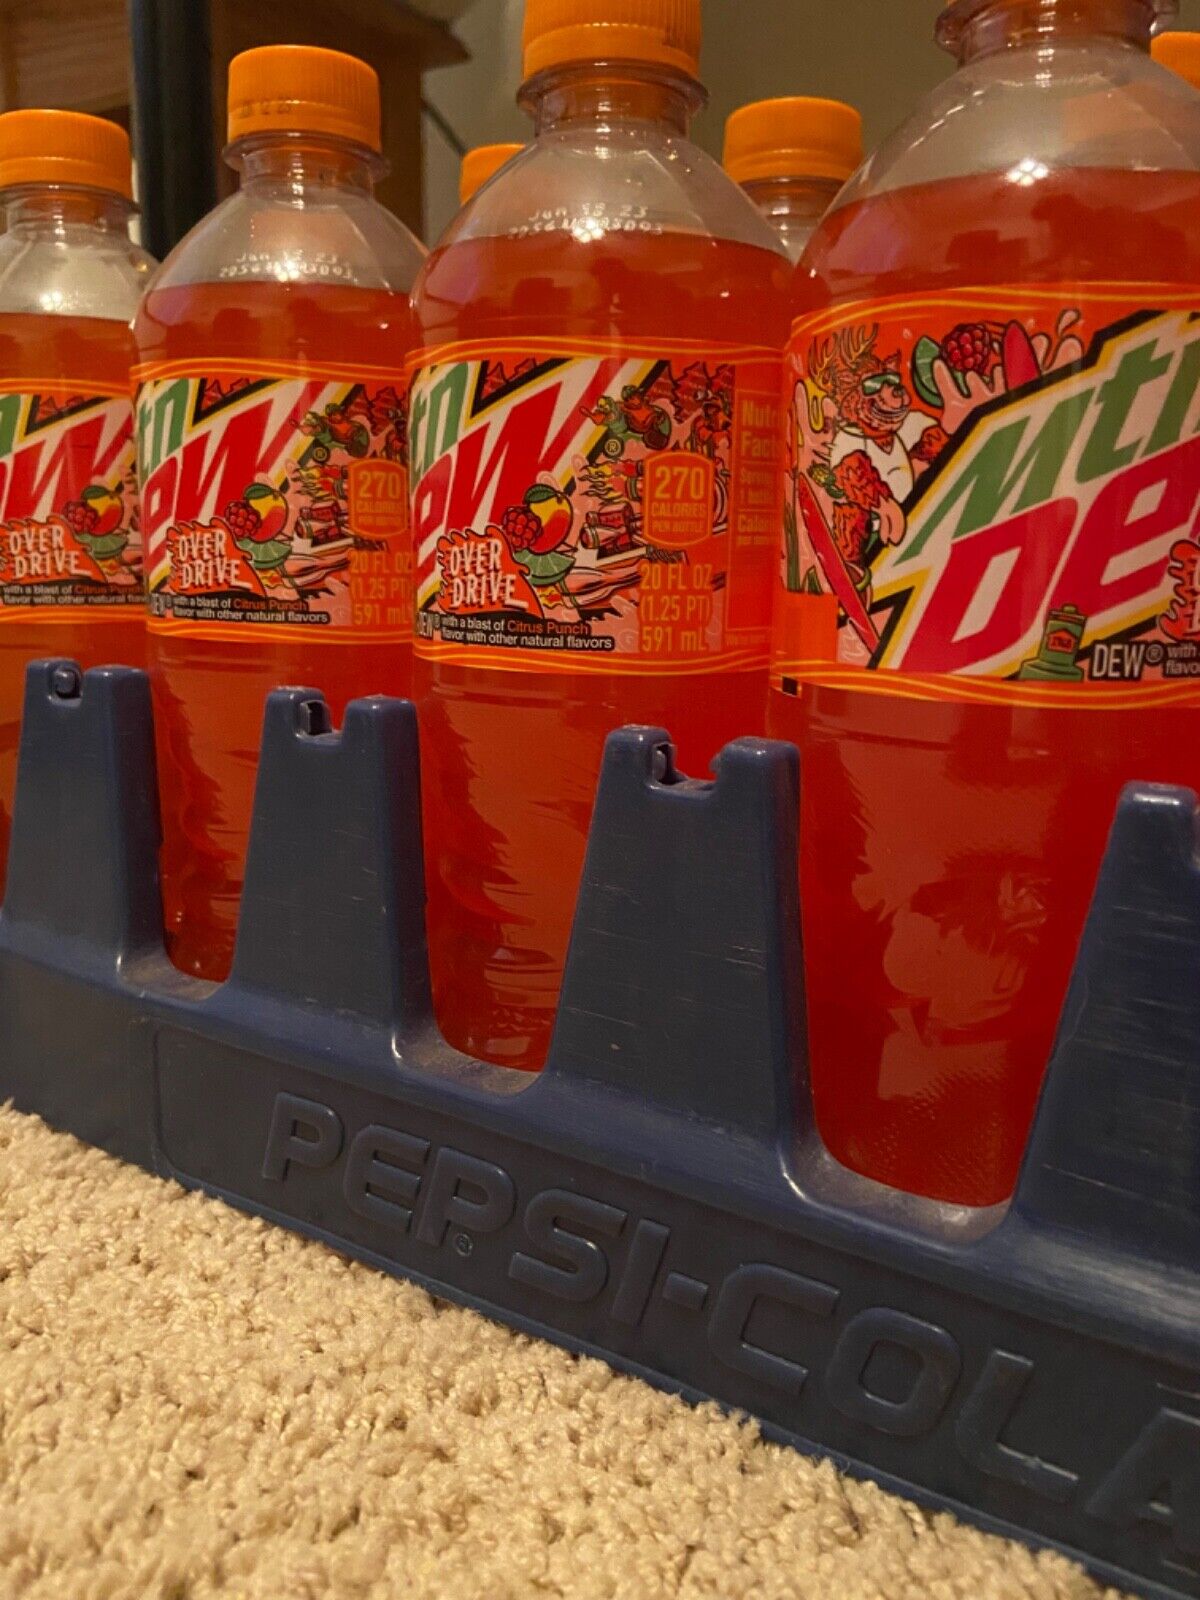 🥭OVERDRIVE MTN DEW BRAND NEW LIMITED 20OZ BOTTLES 🥭RARE MOUNTAIN DEW